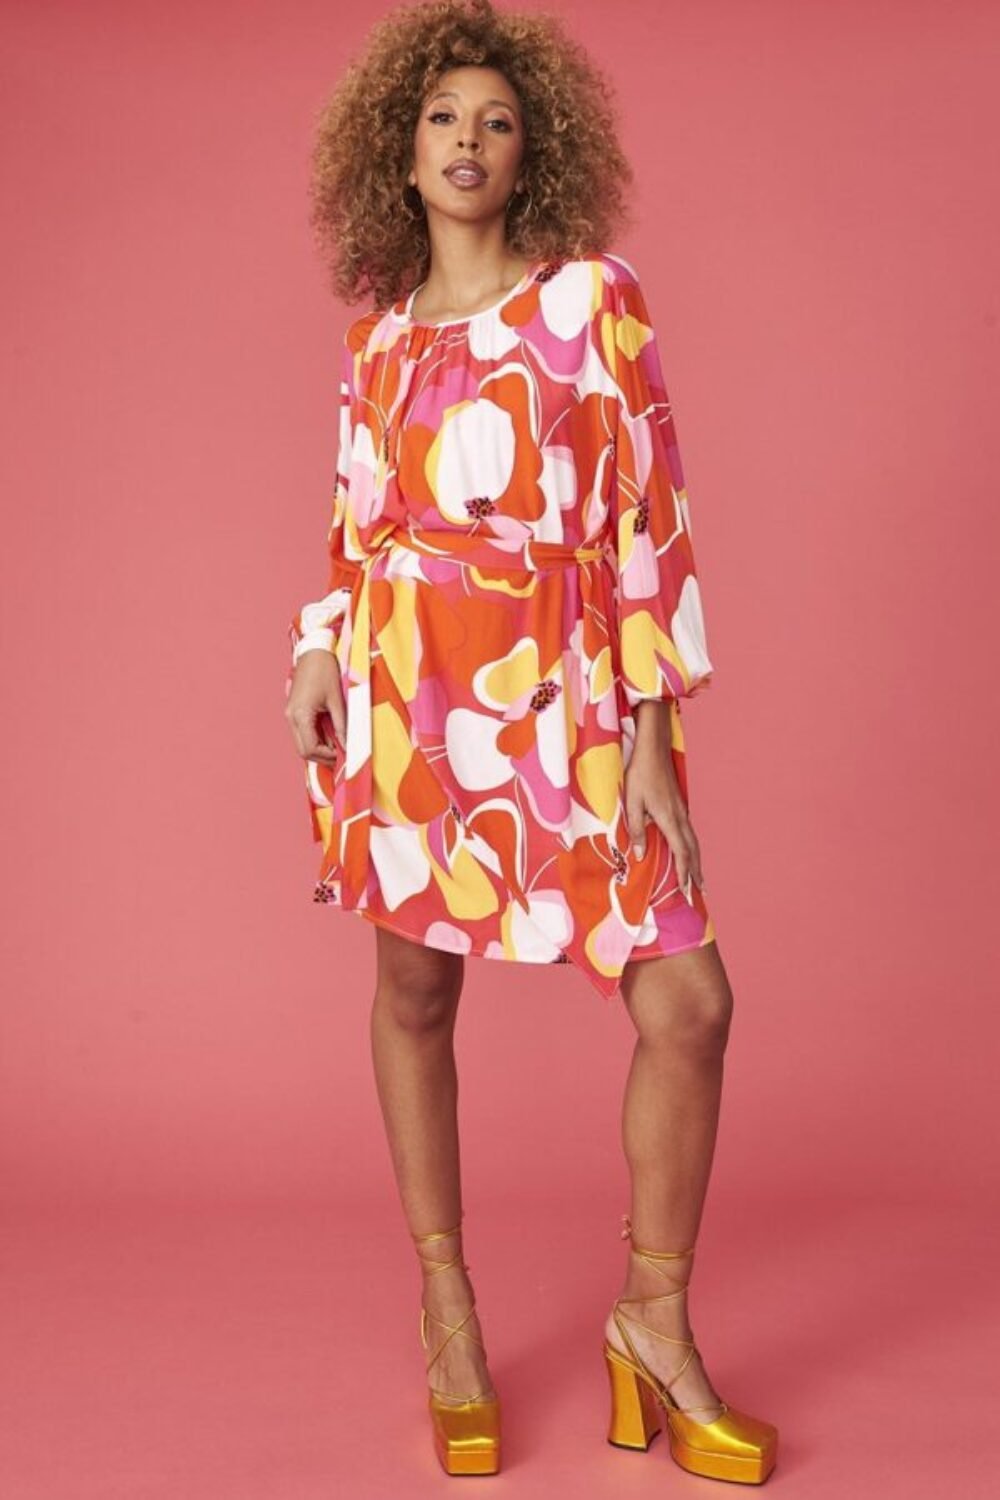 Shop Lux Florence Floral Midi Dress and women's luxury and designer clothes at www.lux-apparel.co.uk